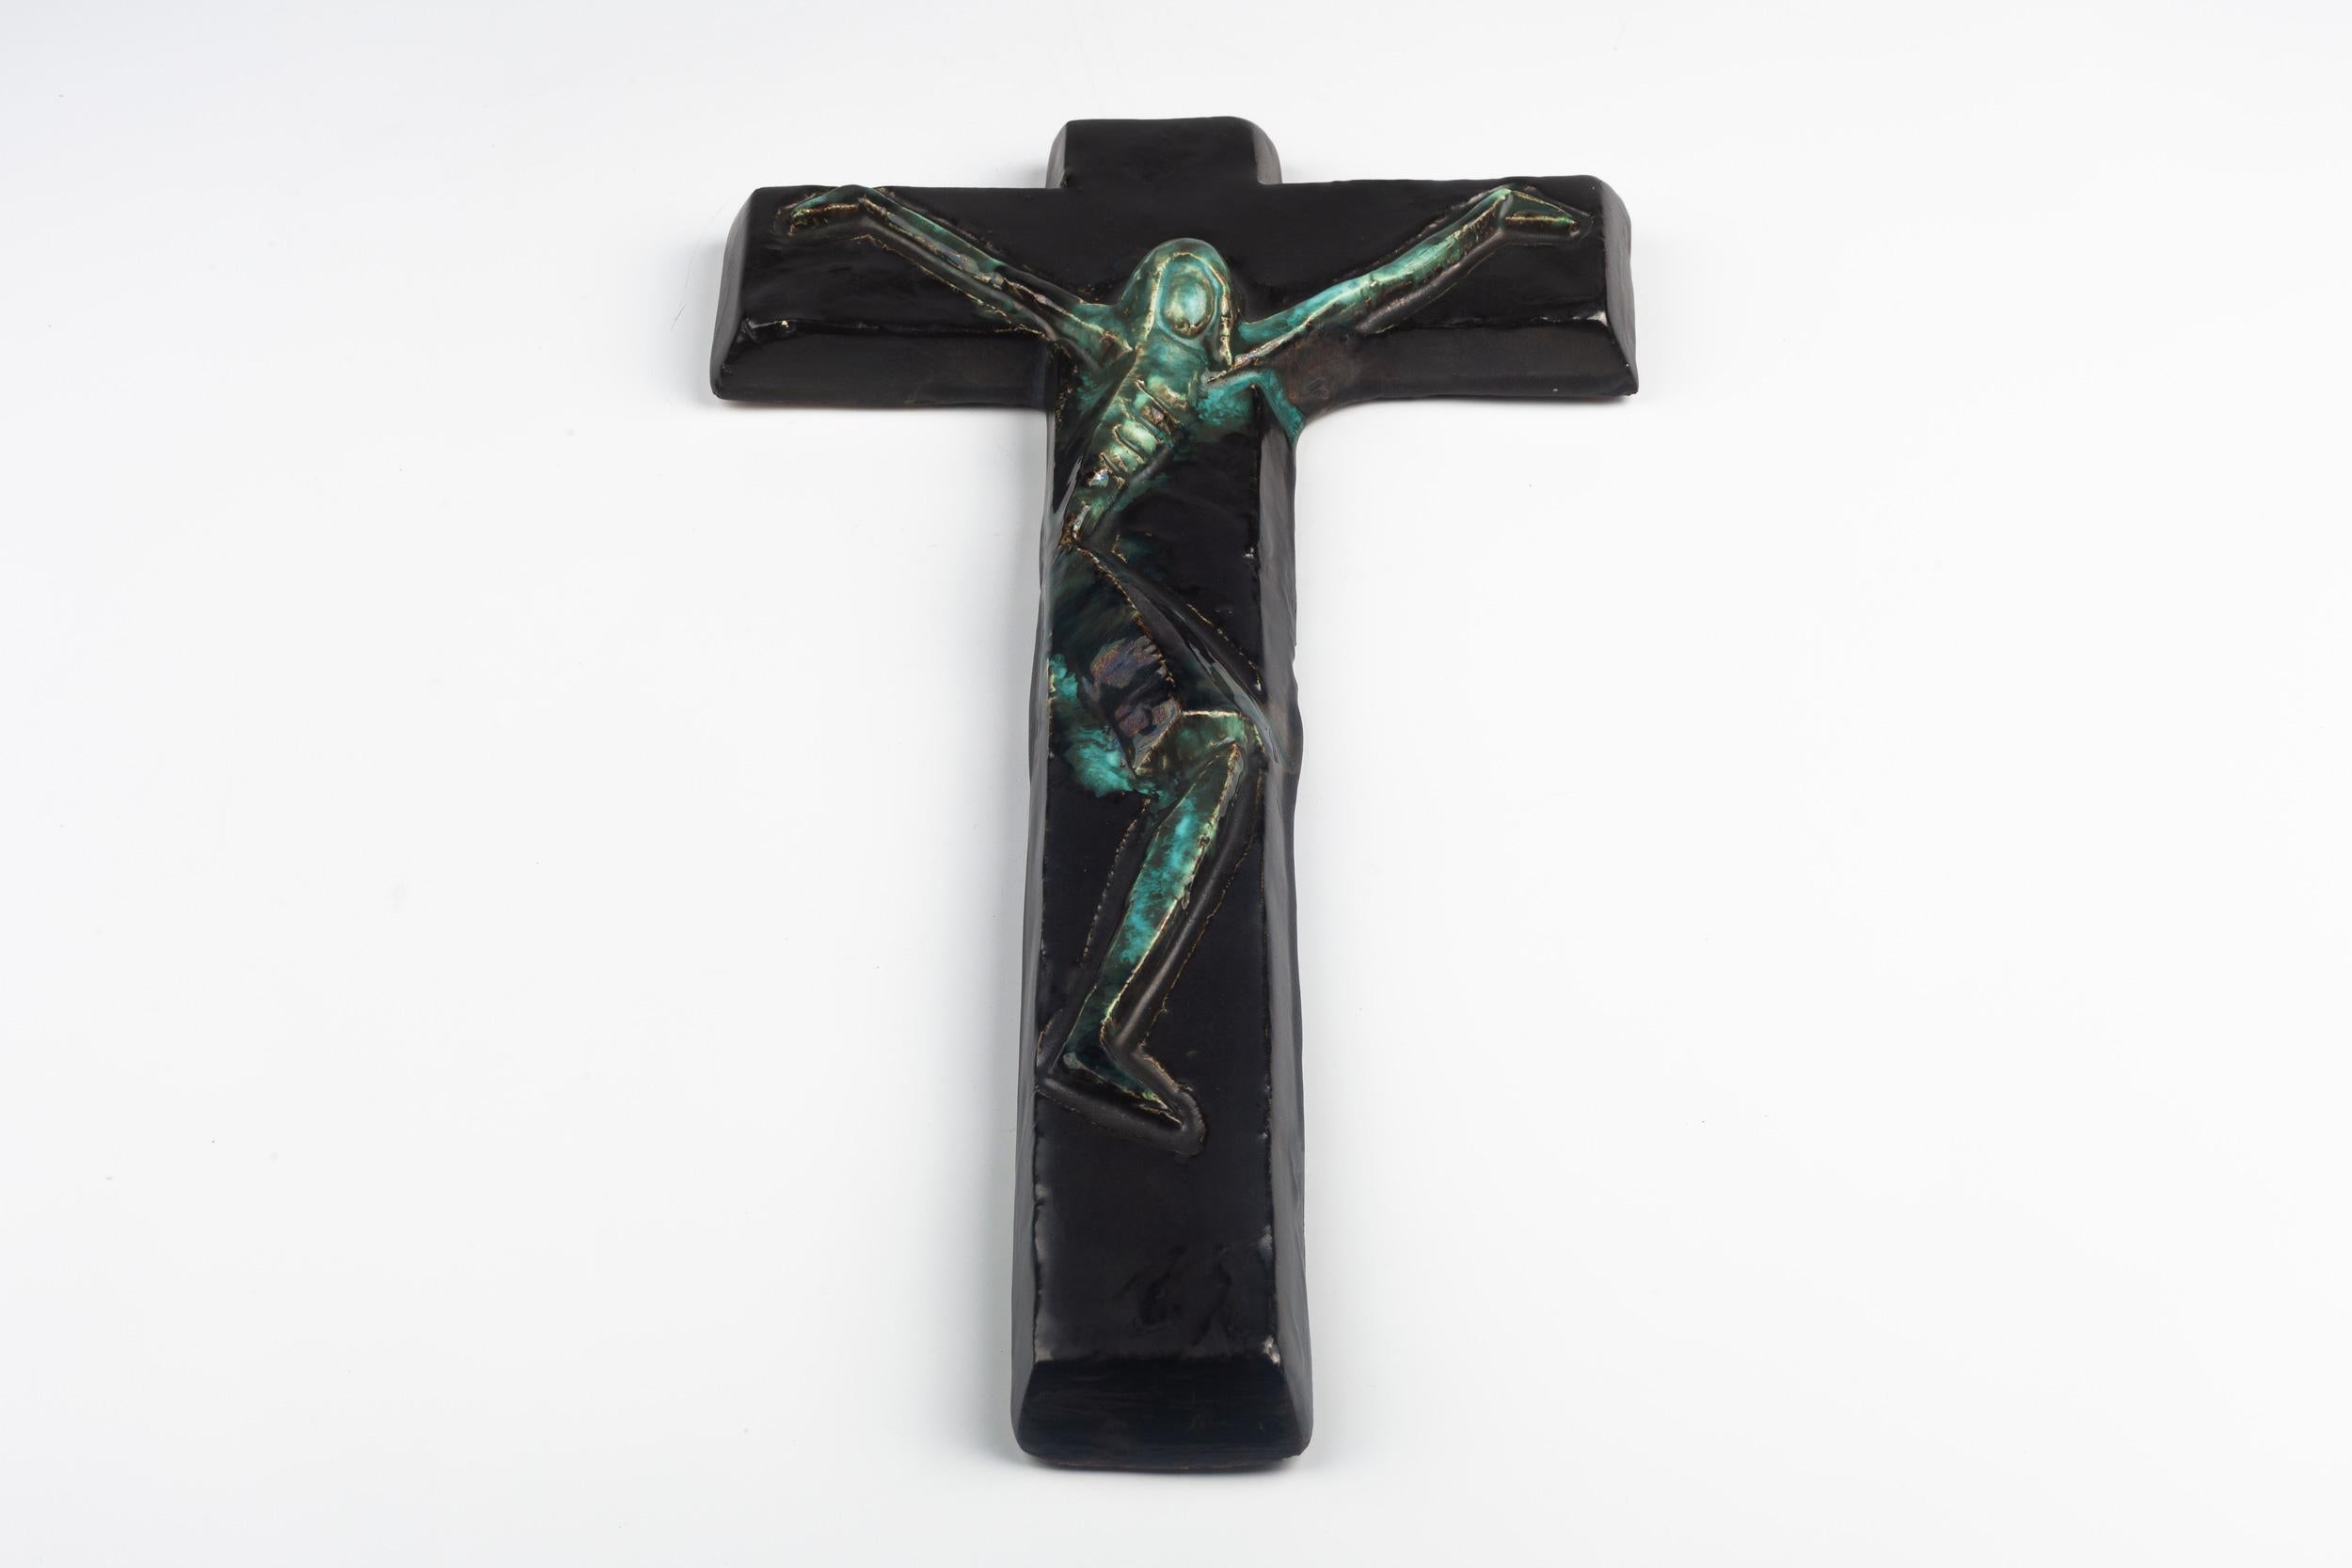 Belgian wall cross in ceramic, hand painted in glossy black with blues and greens on an abstracted Christ figure.

From modernism to brutalism, the crosses in our collection range from being as futurist as a modernist church to as raw as a